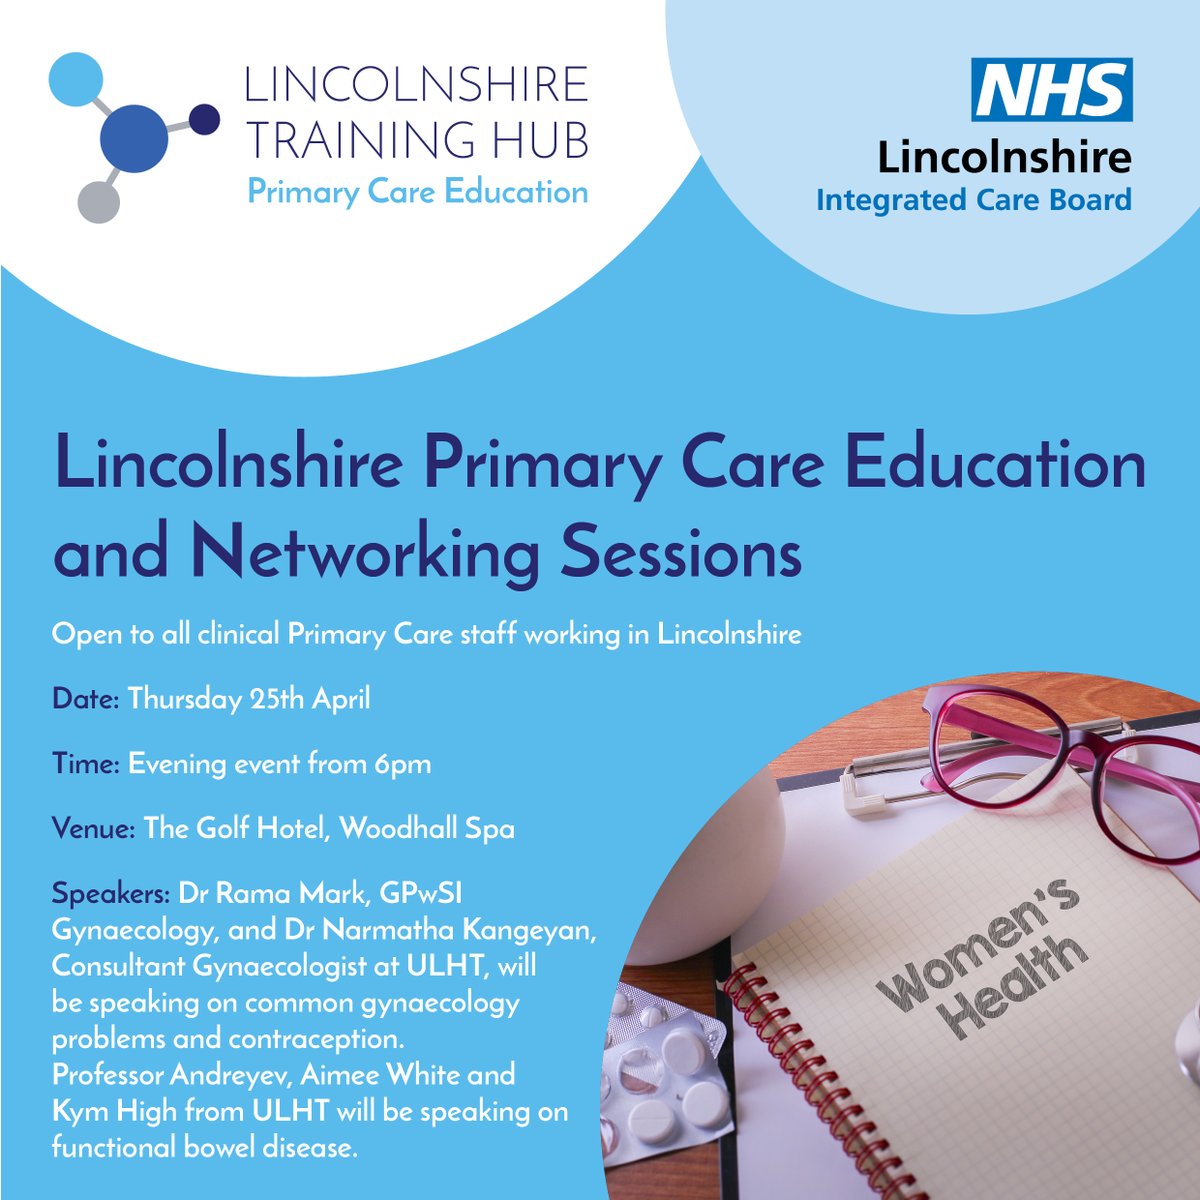 Final call for registration for the April Primary Care Education and Networking event! Closing date: Monday 15th April. Book here: lincolnshiretraininghub.nhs.uk/training-and-e…